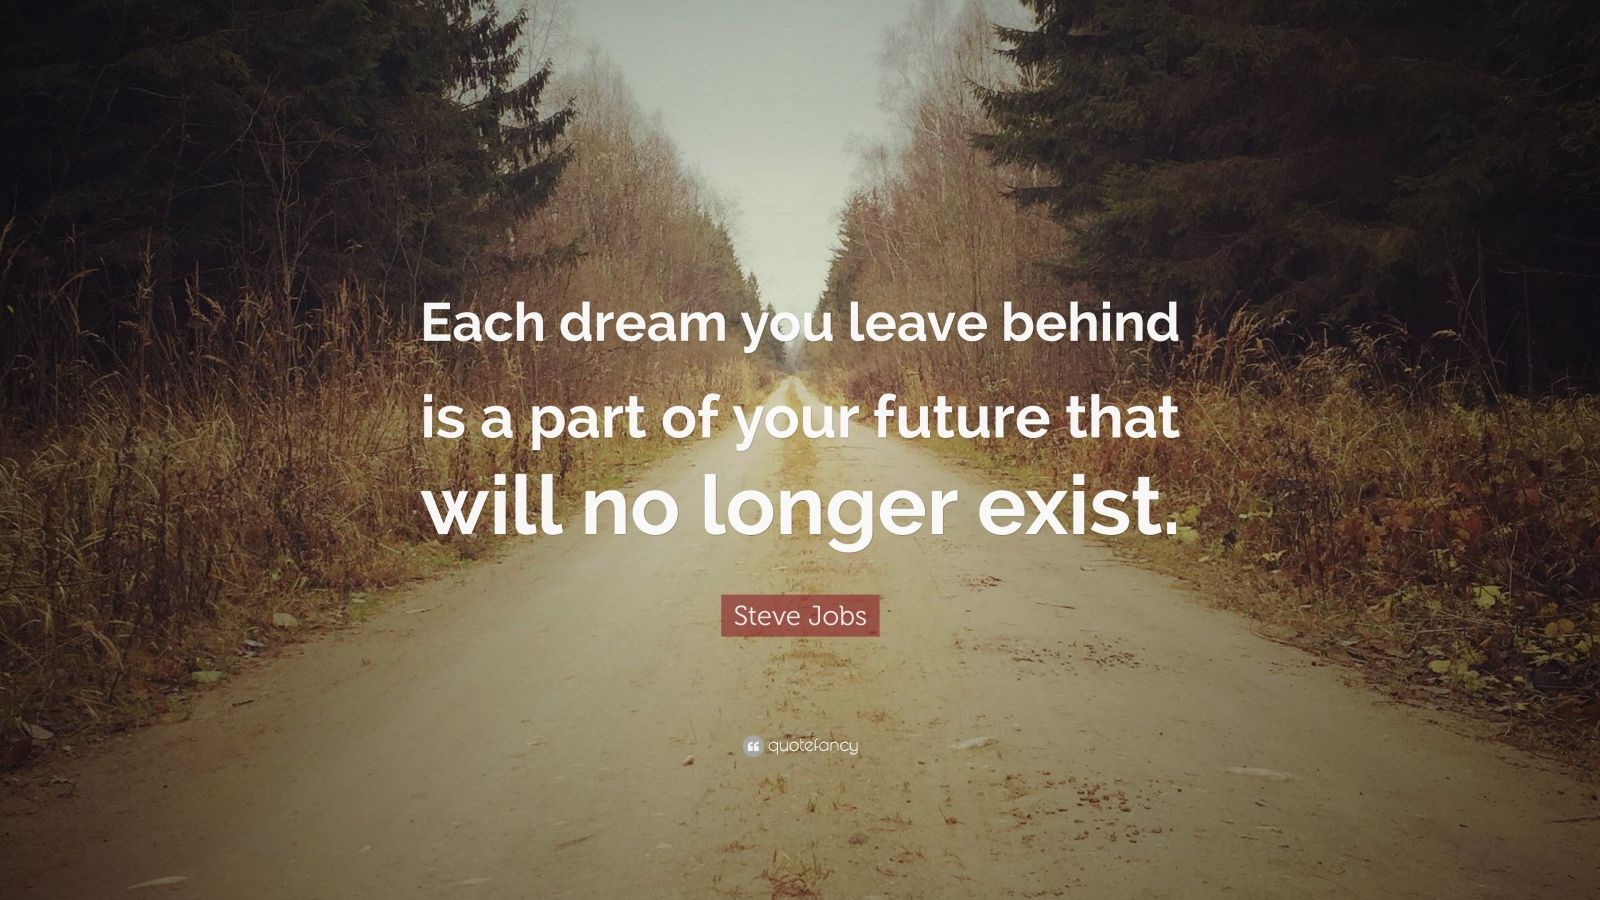 Steve Jobs Quote: “Each dream you leave behind is a part of your future